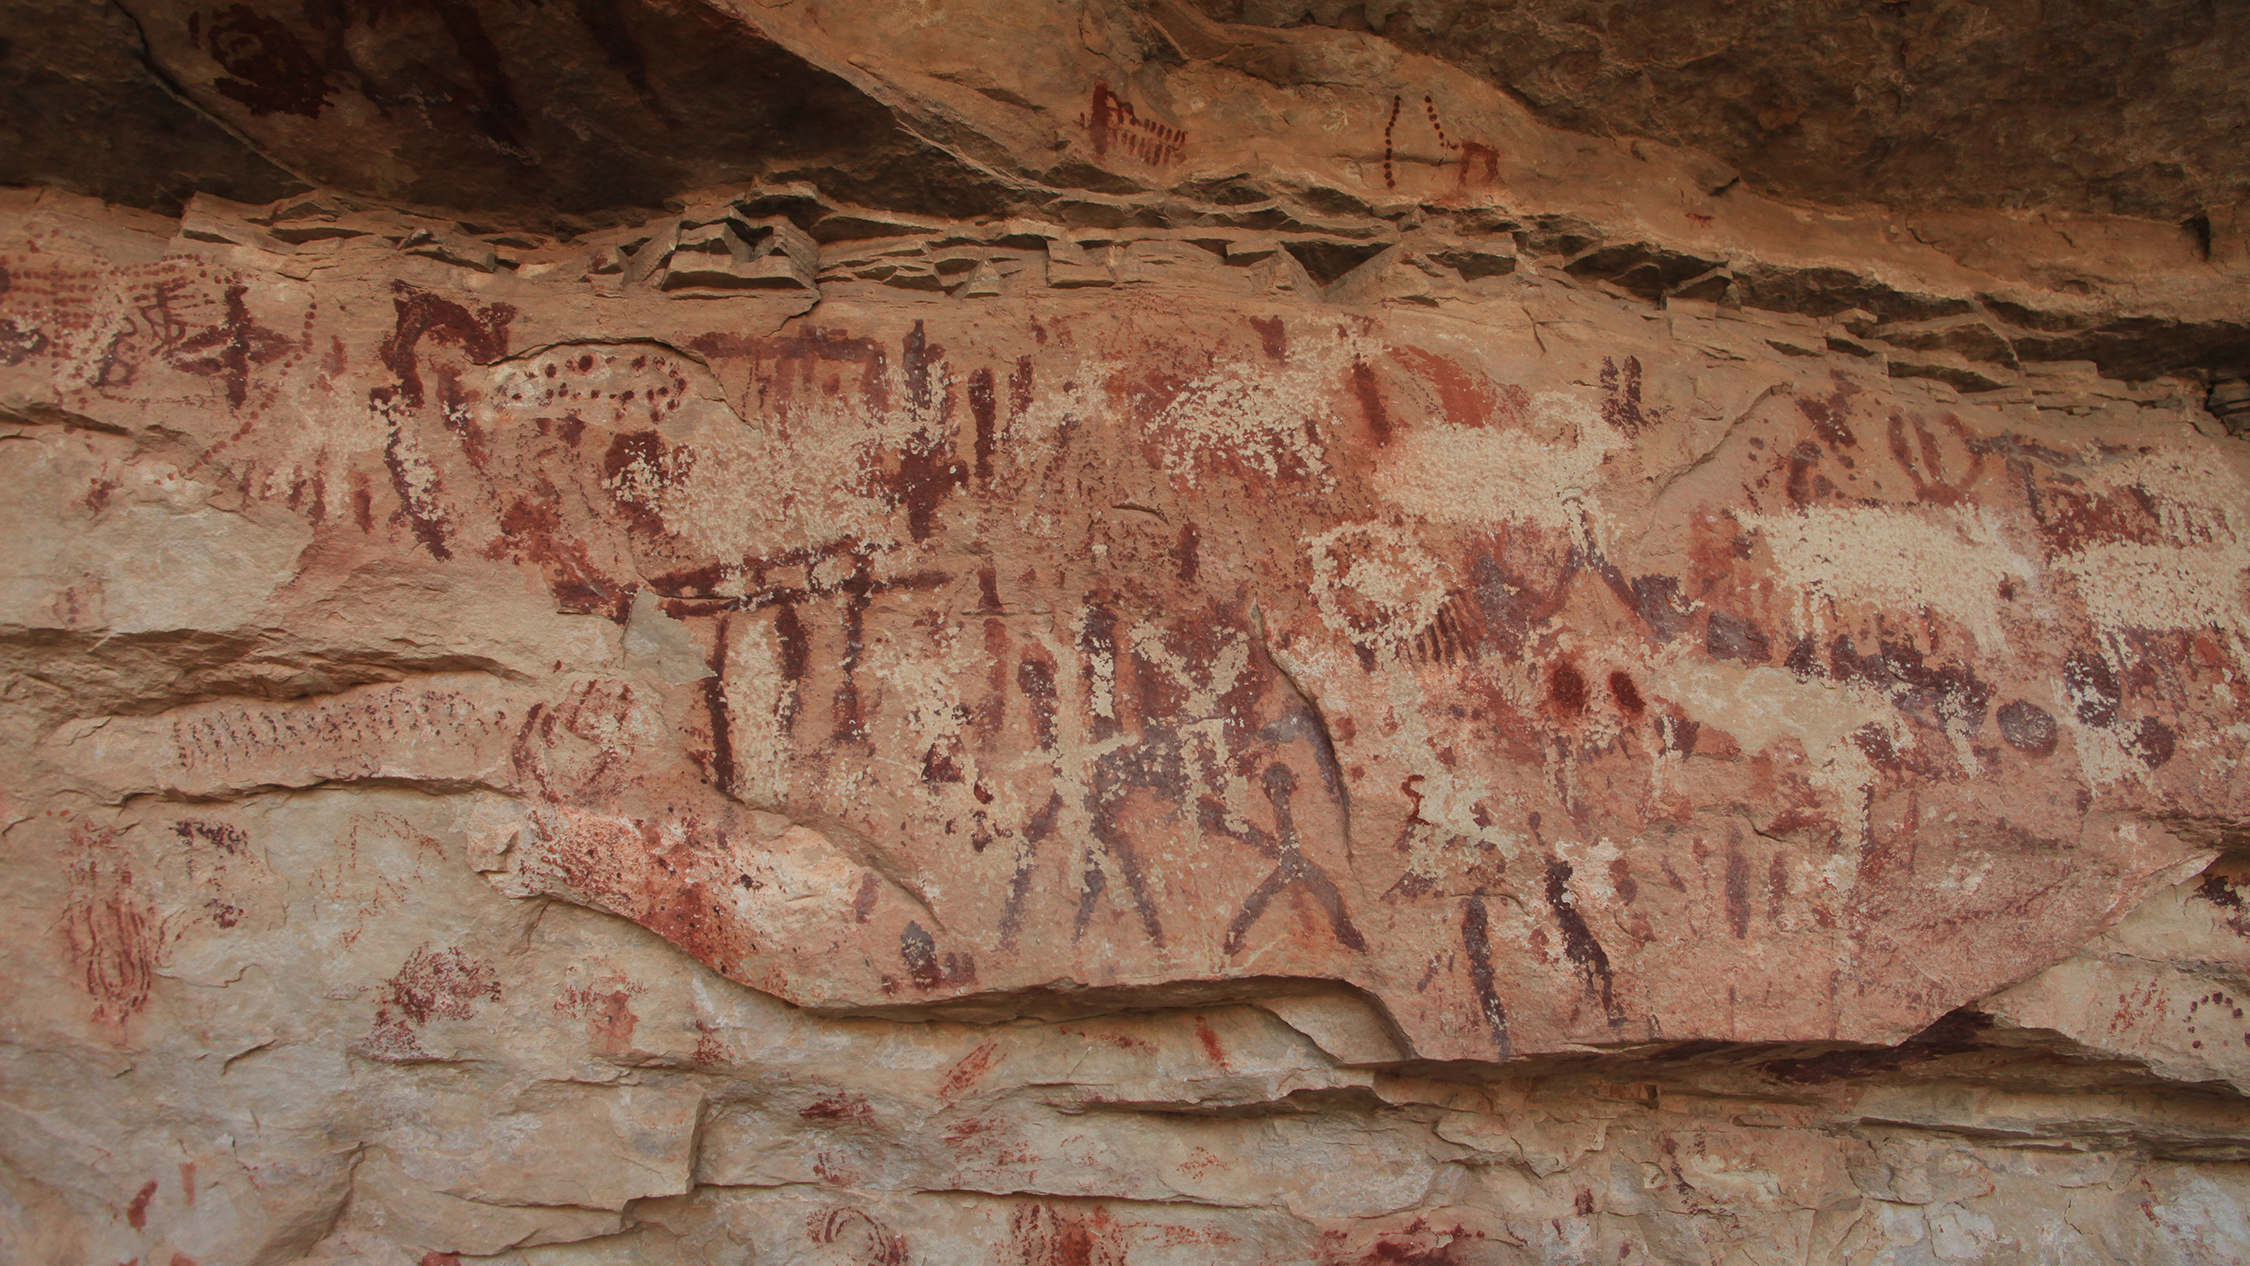 Eleven Native American tribes have modern affiliations with Grand Canyon National Park. Evidence of their historical relations are found in overhangs on the rim and throughout the canyon.